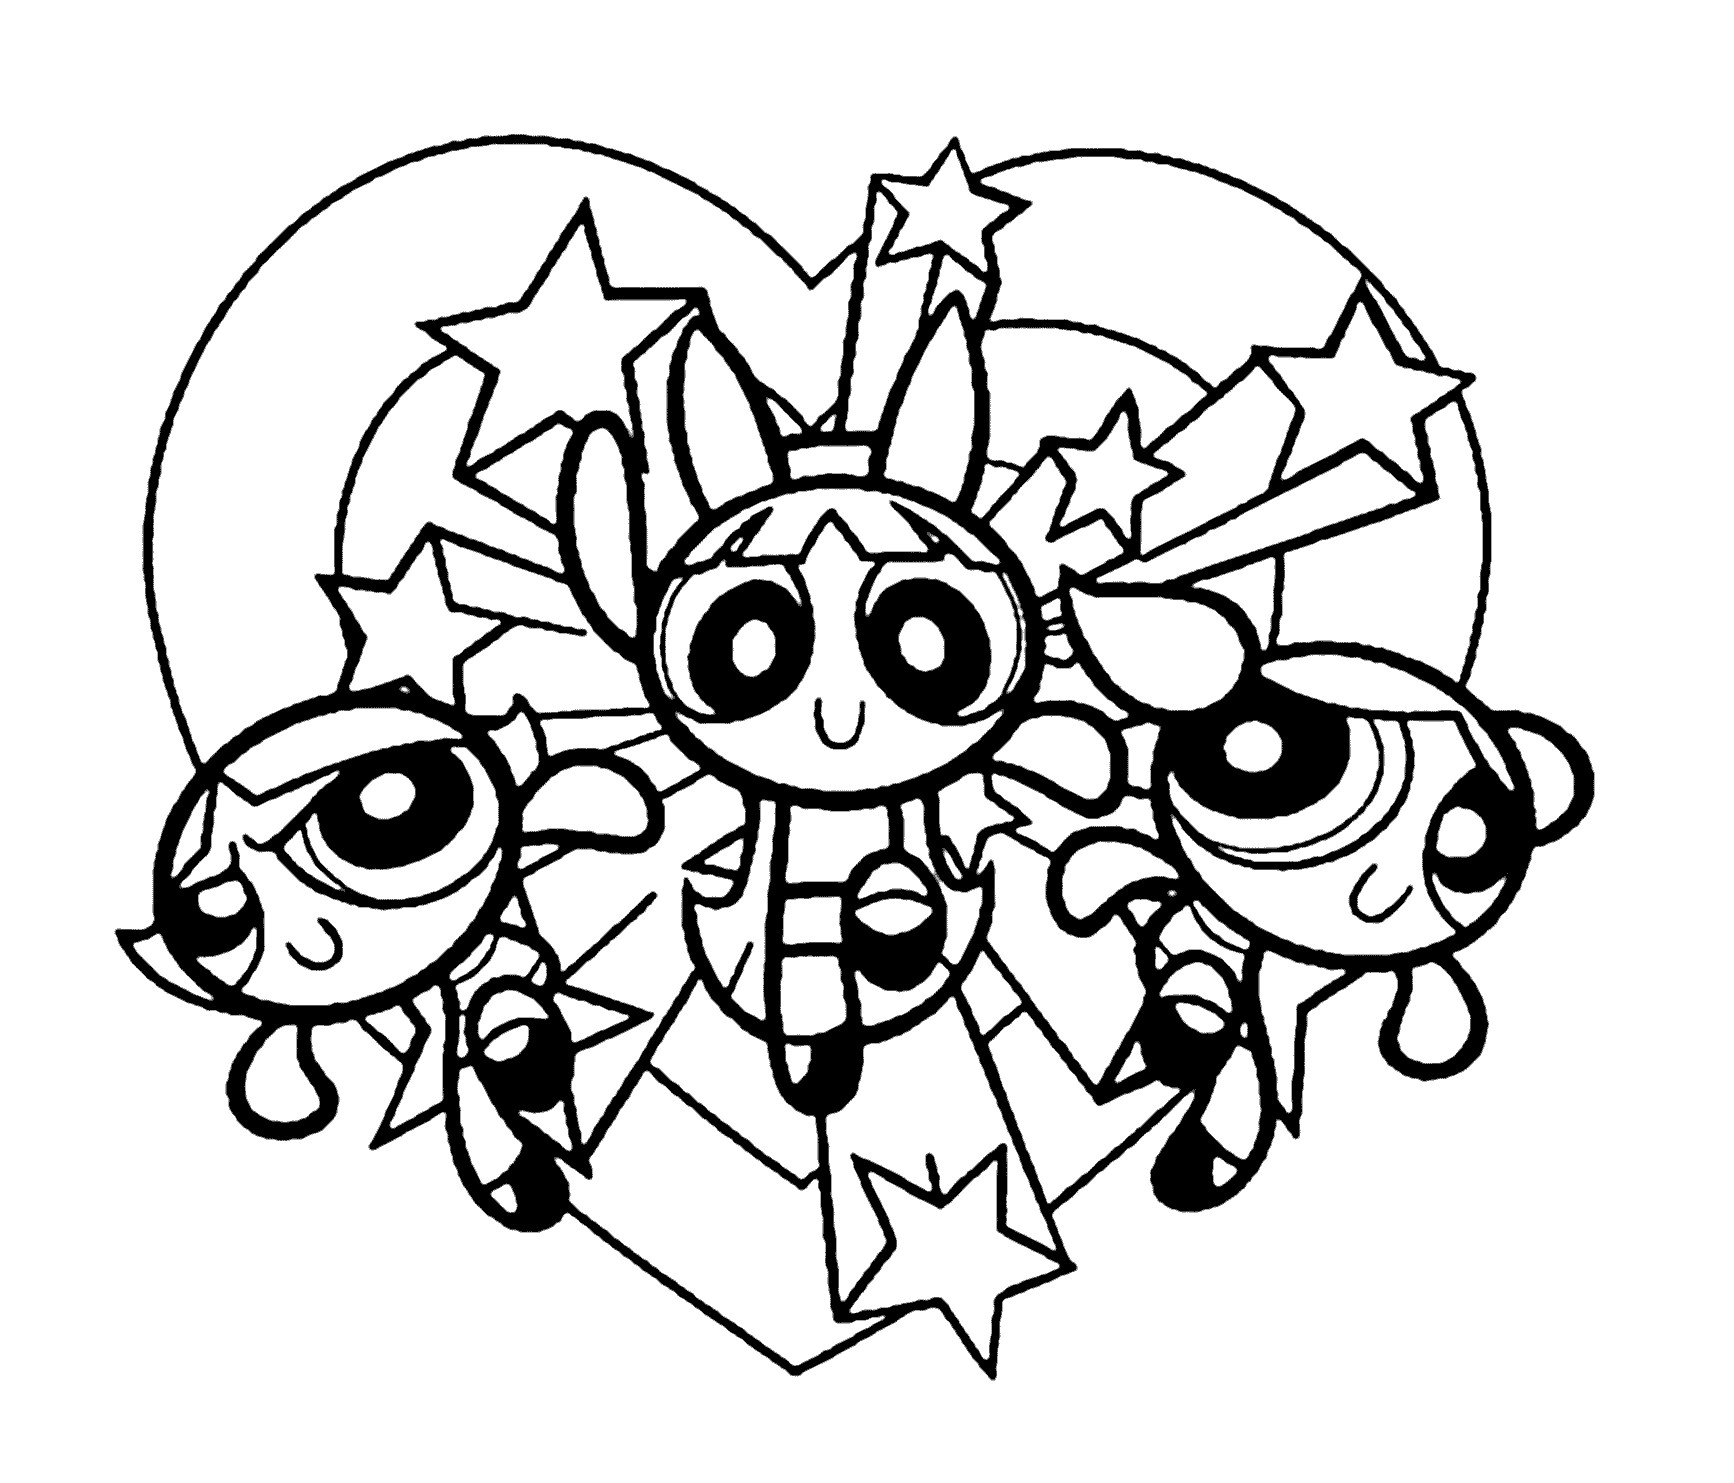 Powder Puff Girls Coloring Pages
 Coloring Pages For Girls 9 10